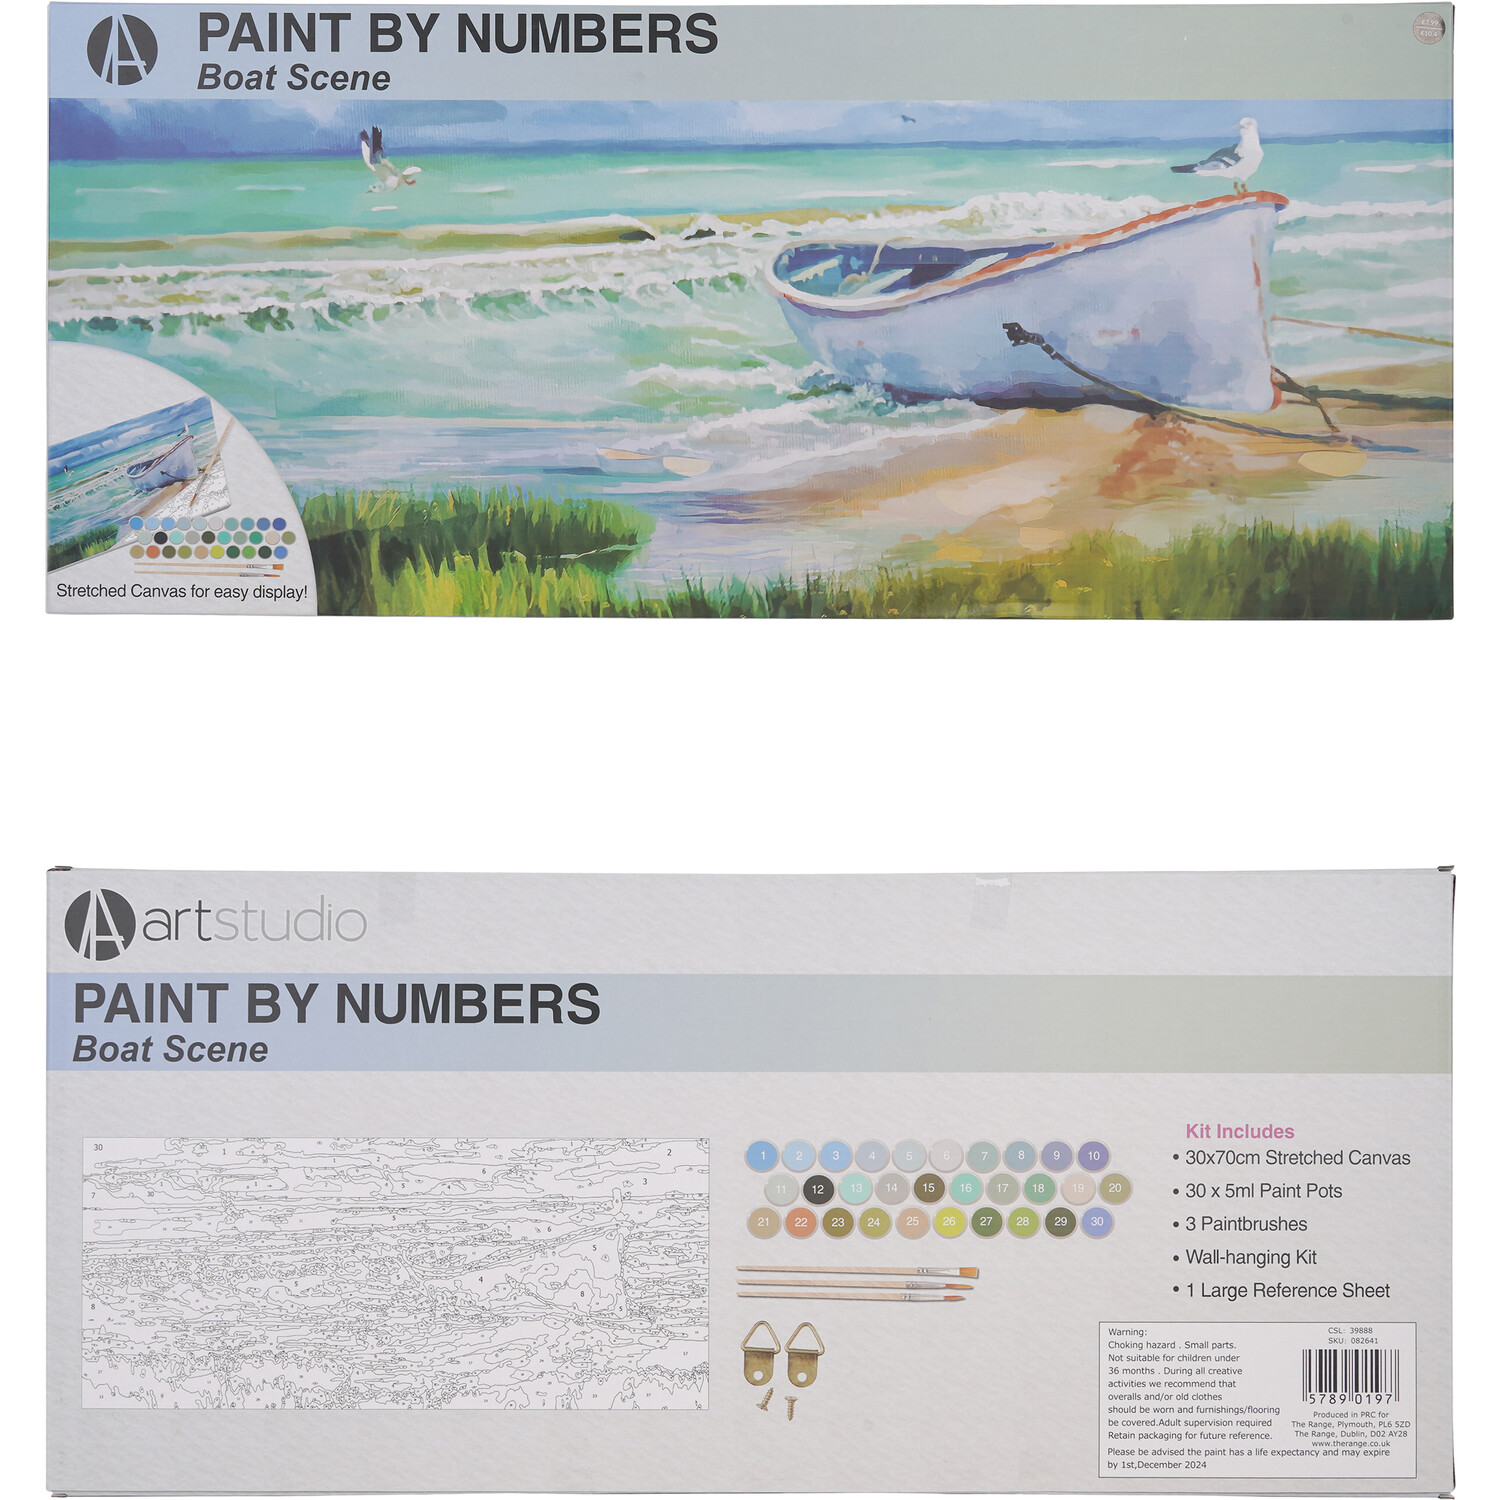 Paint by Numbers Boat Scene Image 5